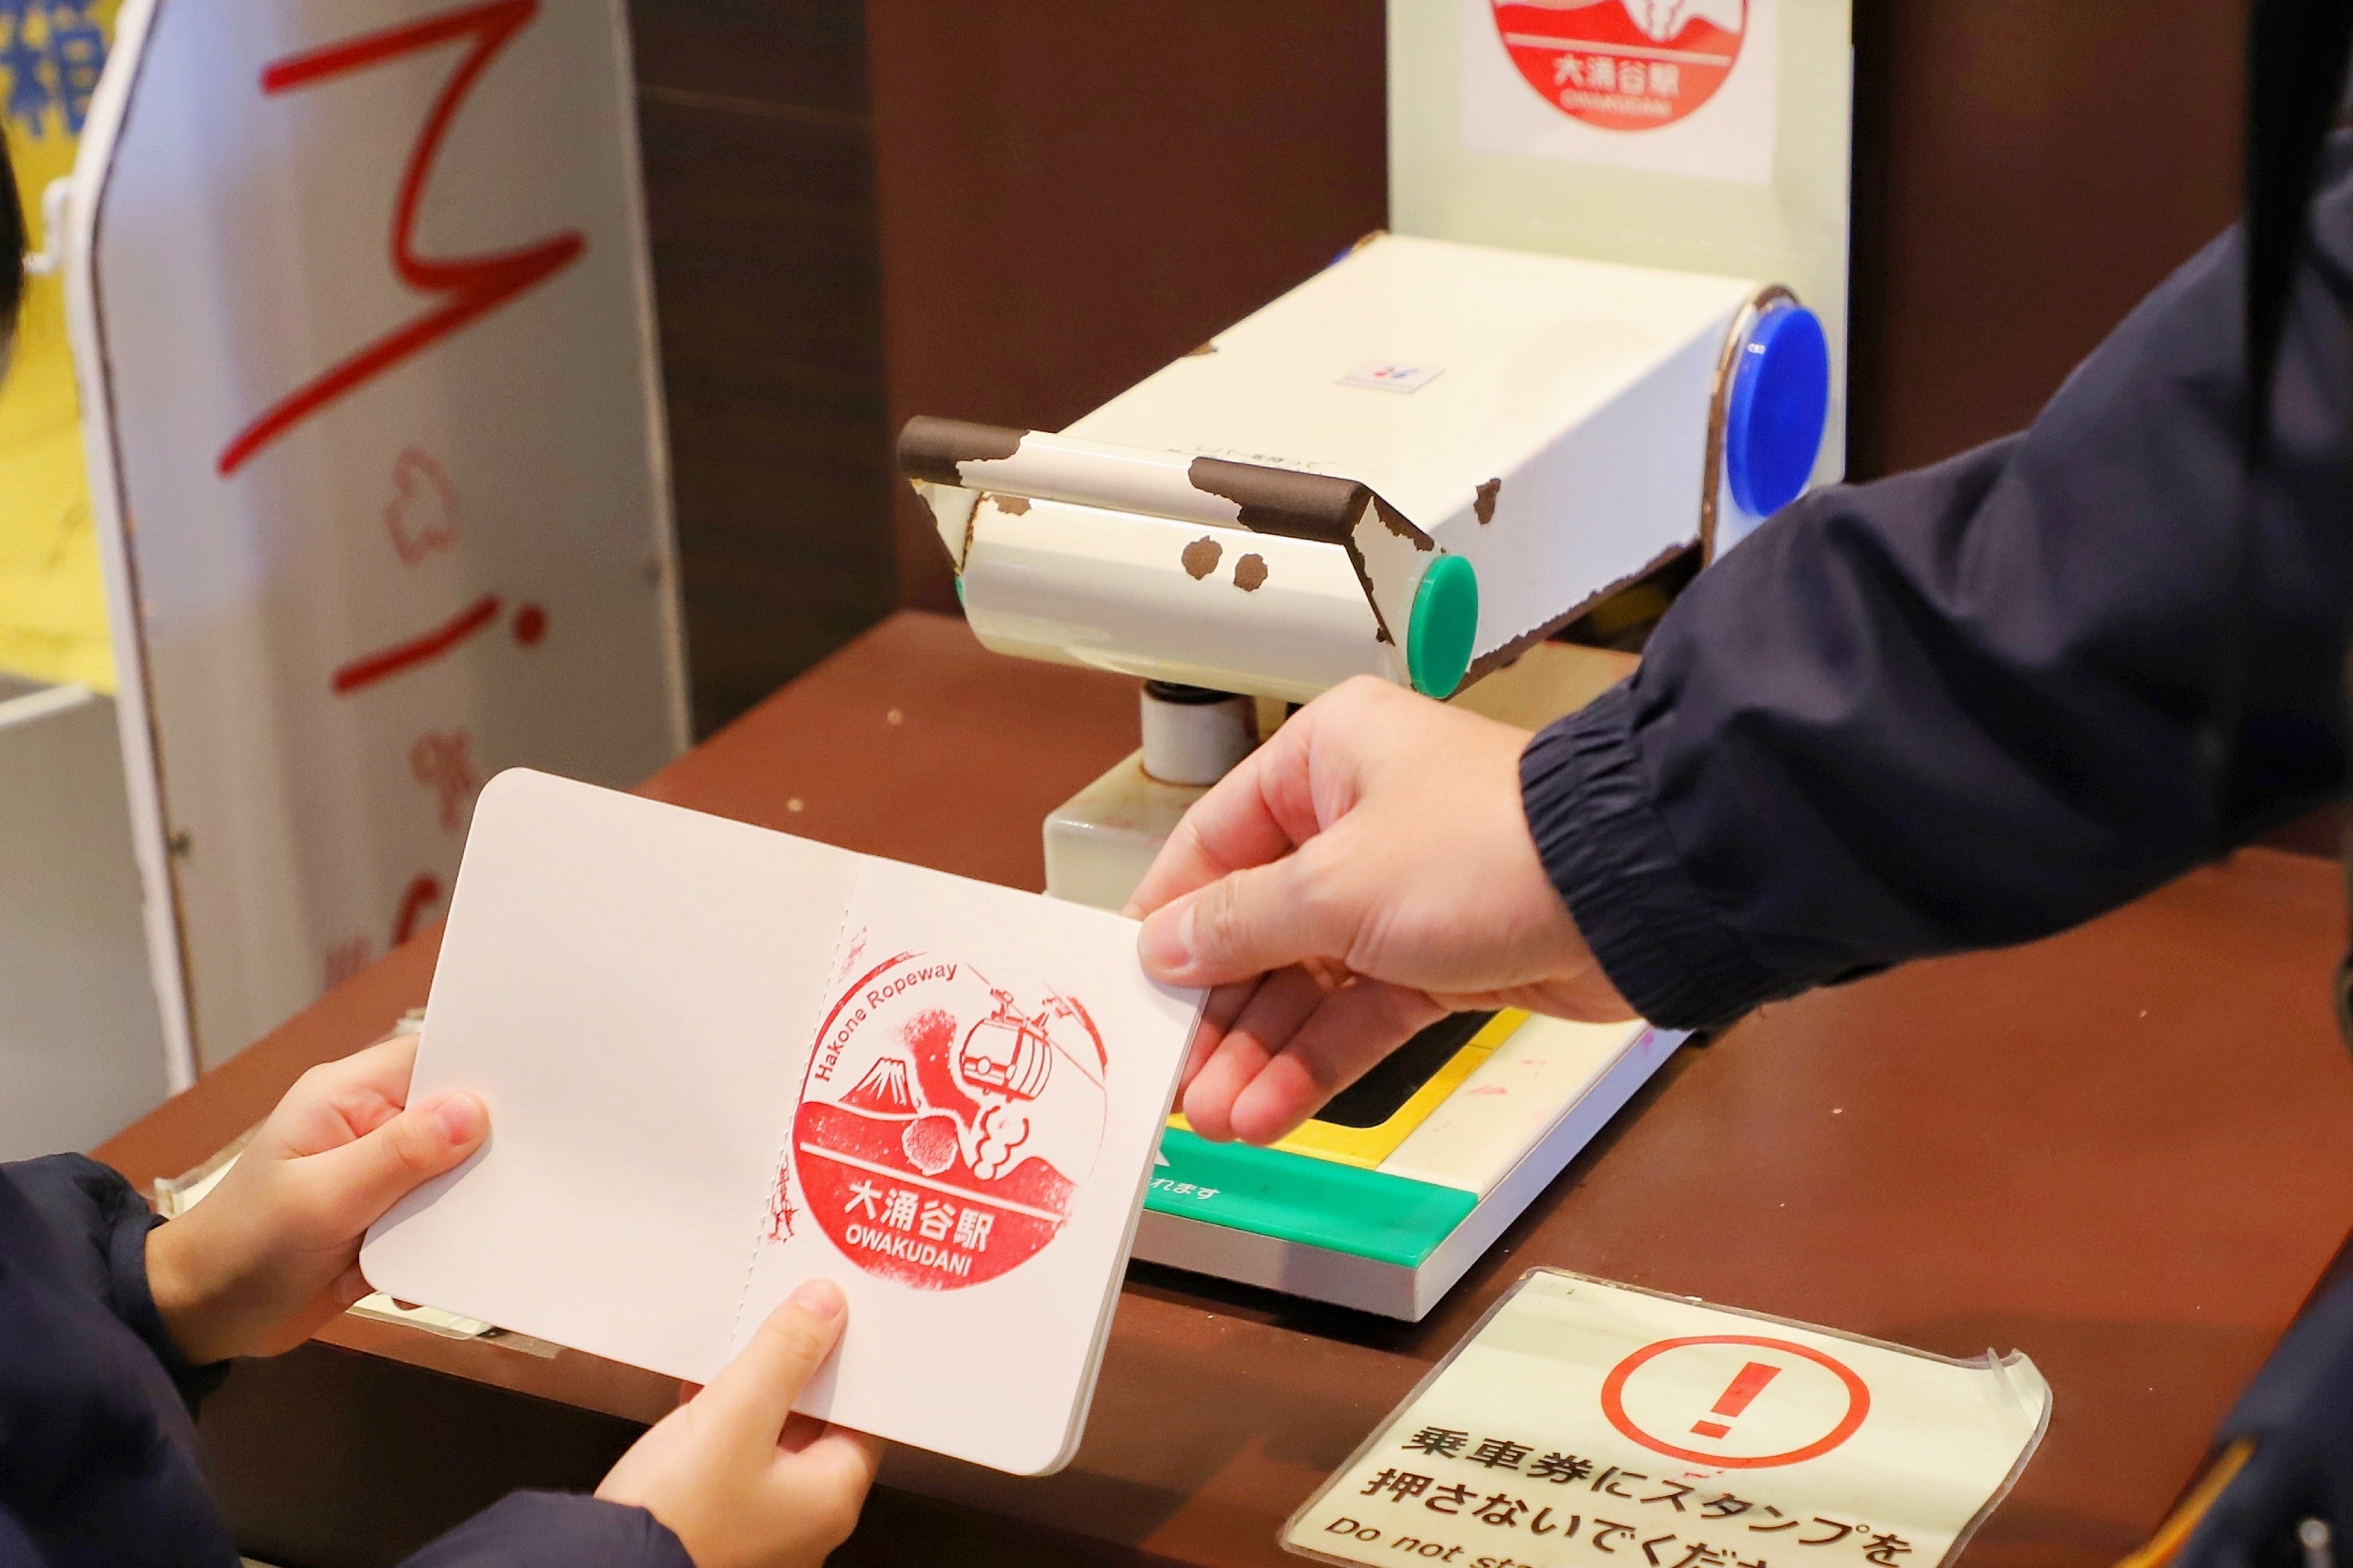 Japan's Stamp Rallies: What They Are and How To Participate